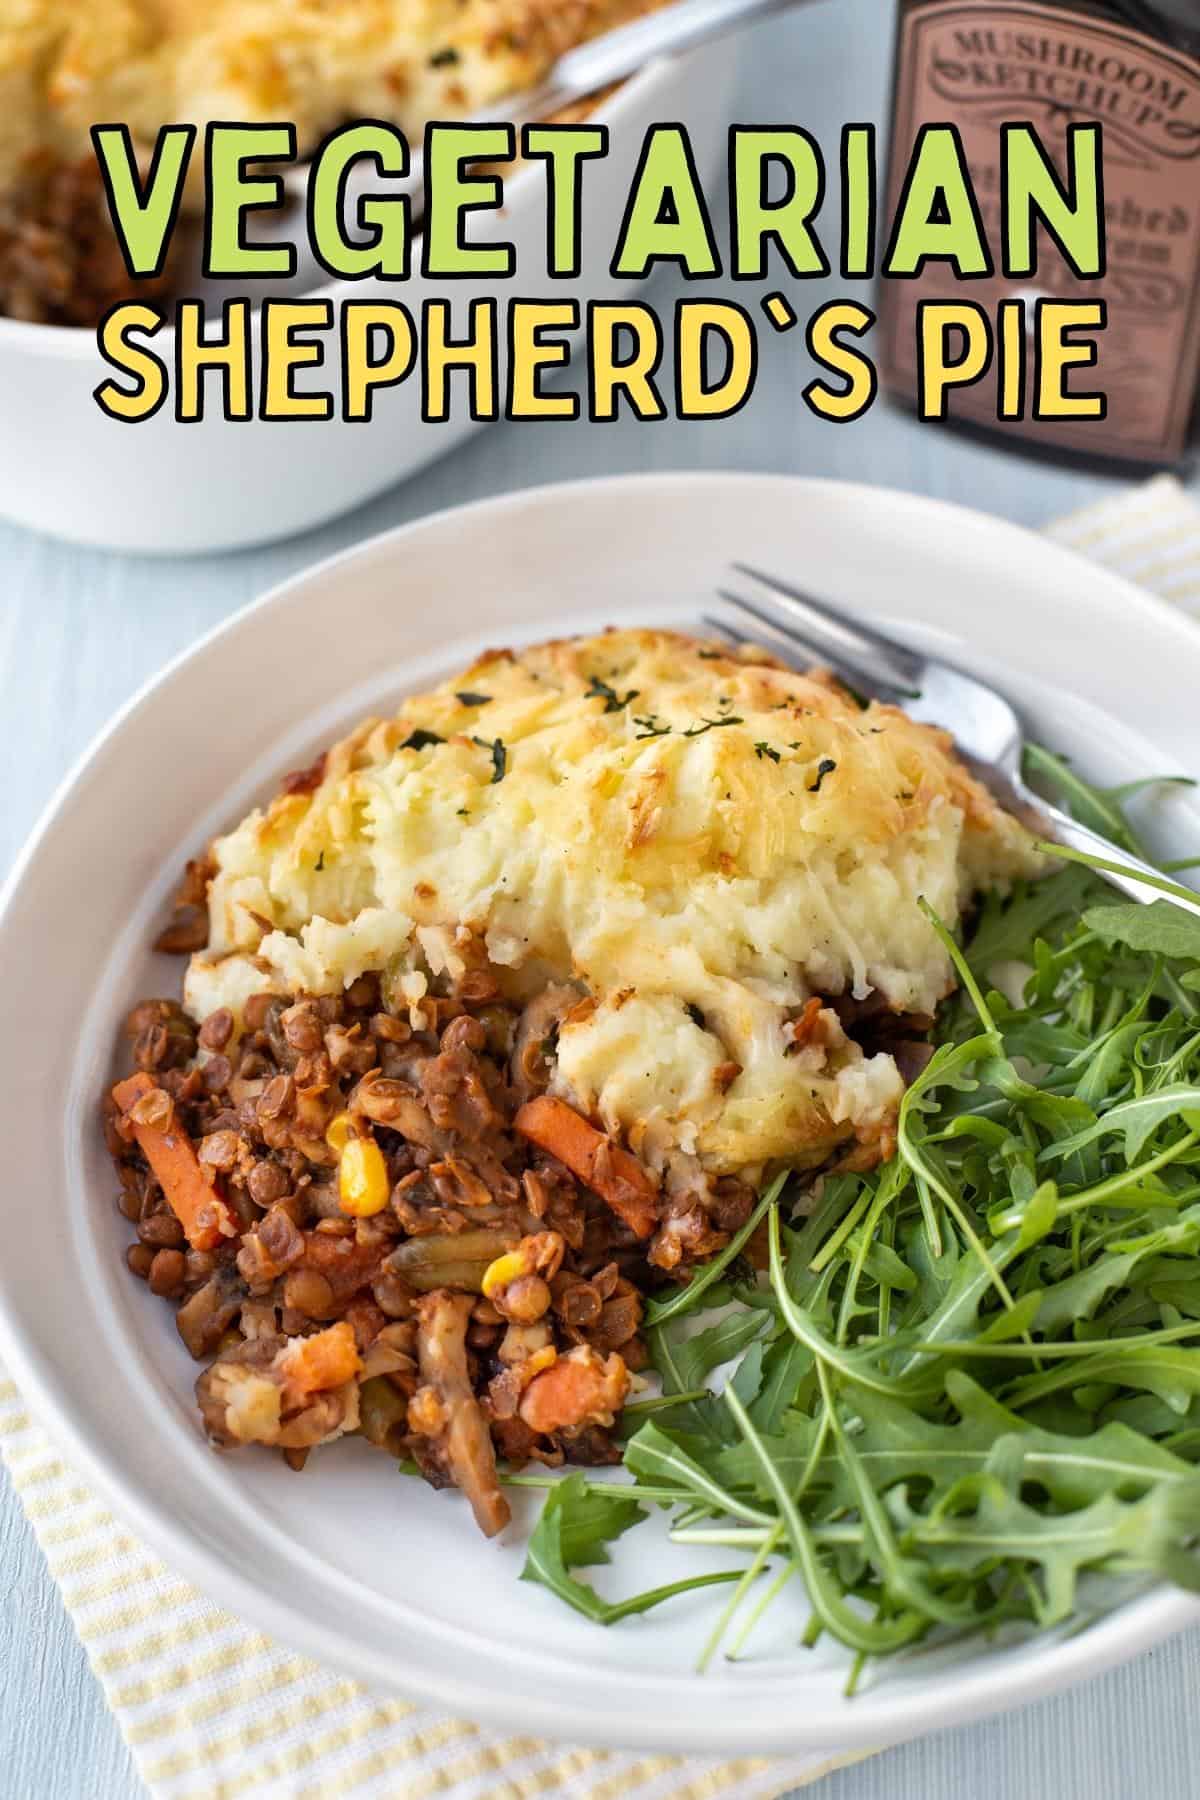 A portion of vegetarian shepherd's pie on a plate with fresh rocket.